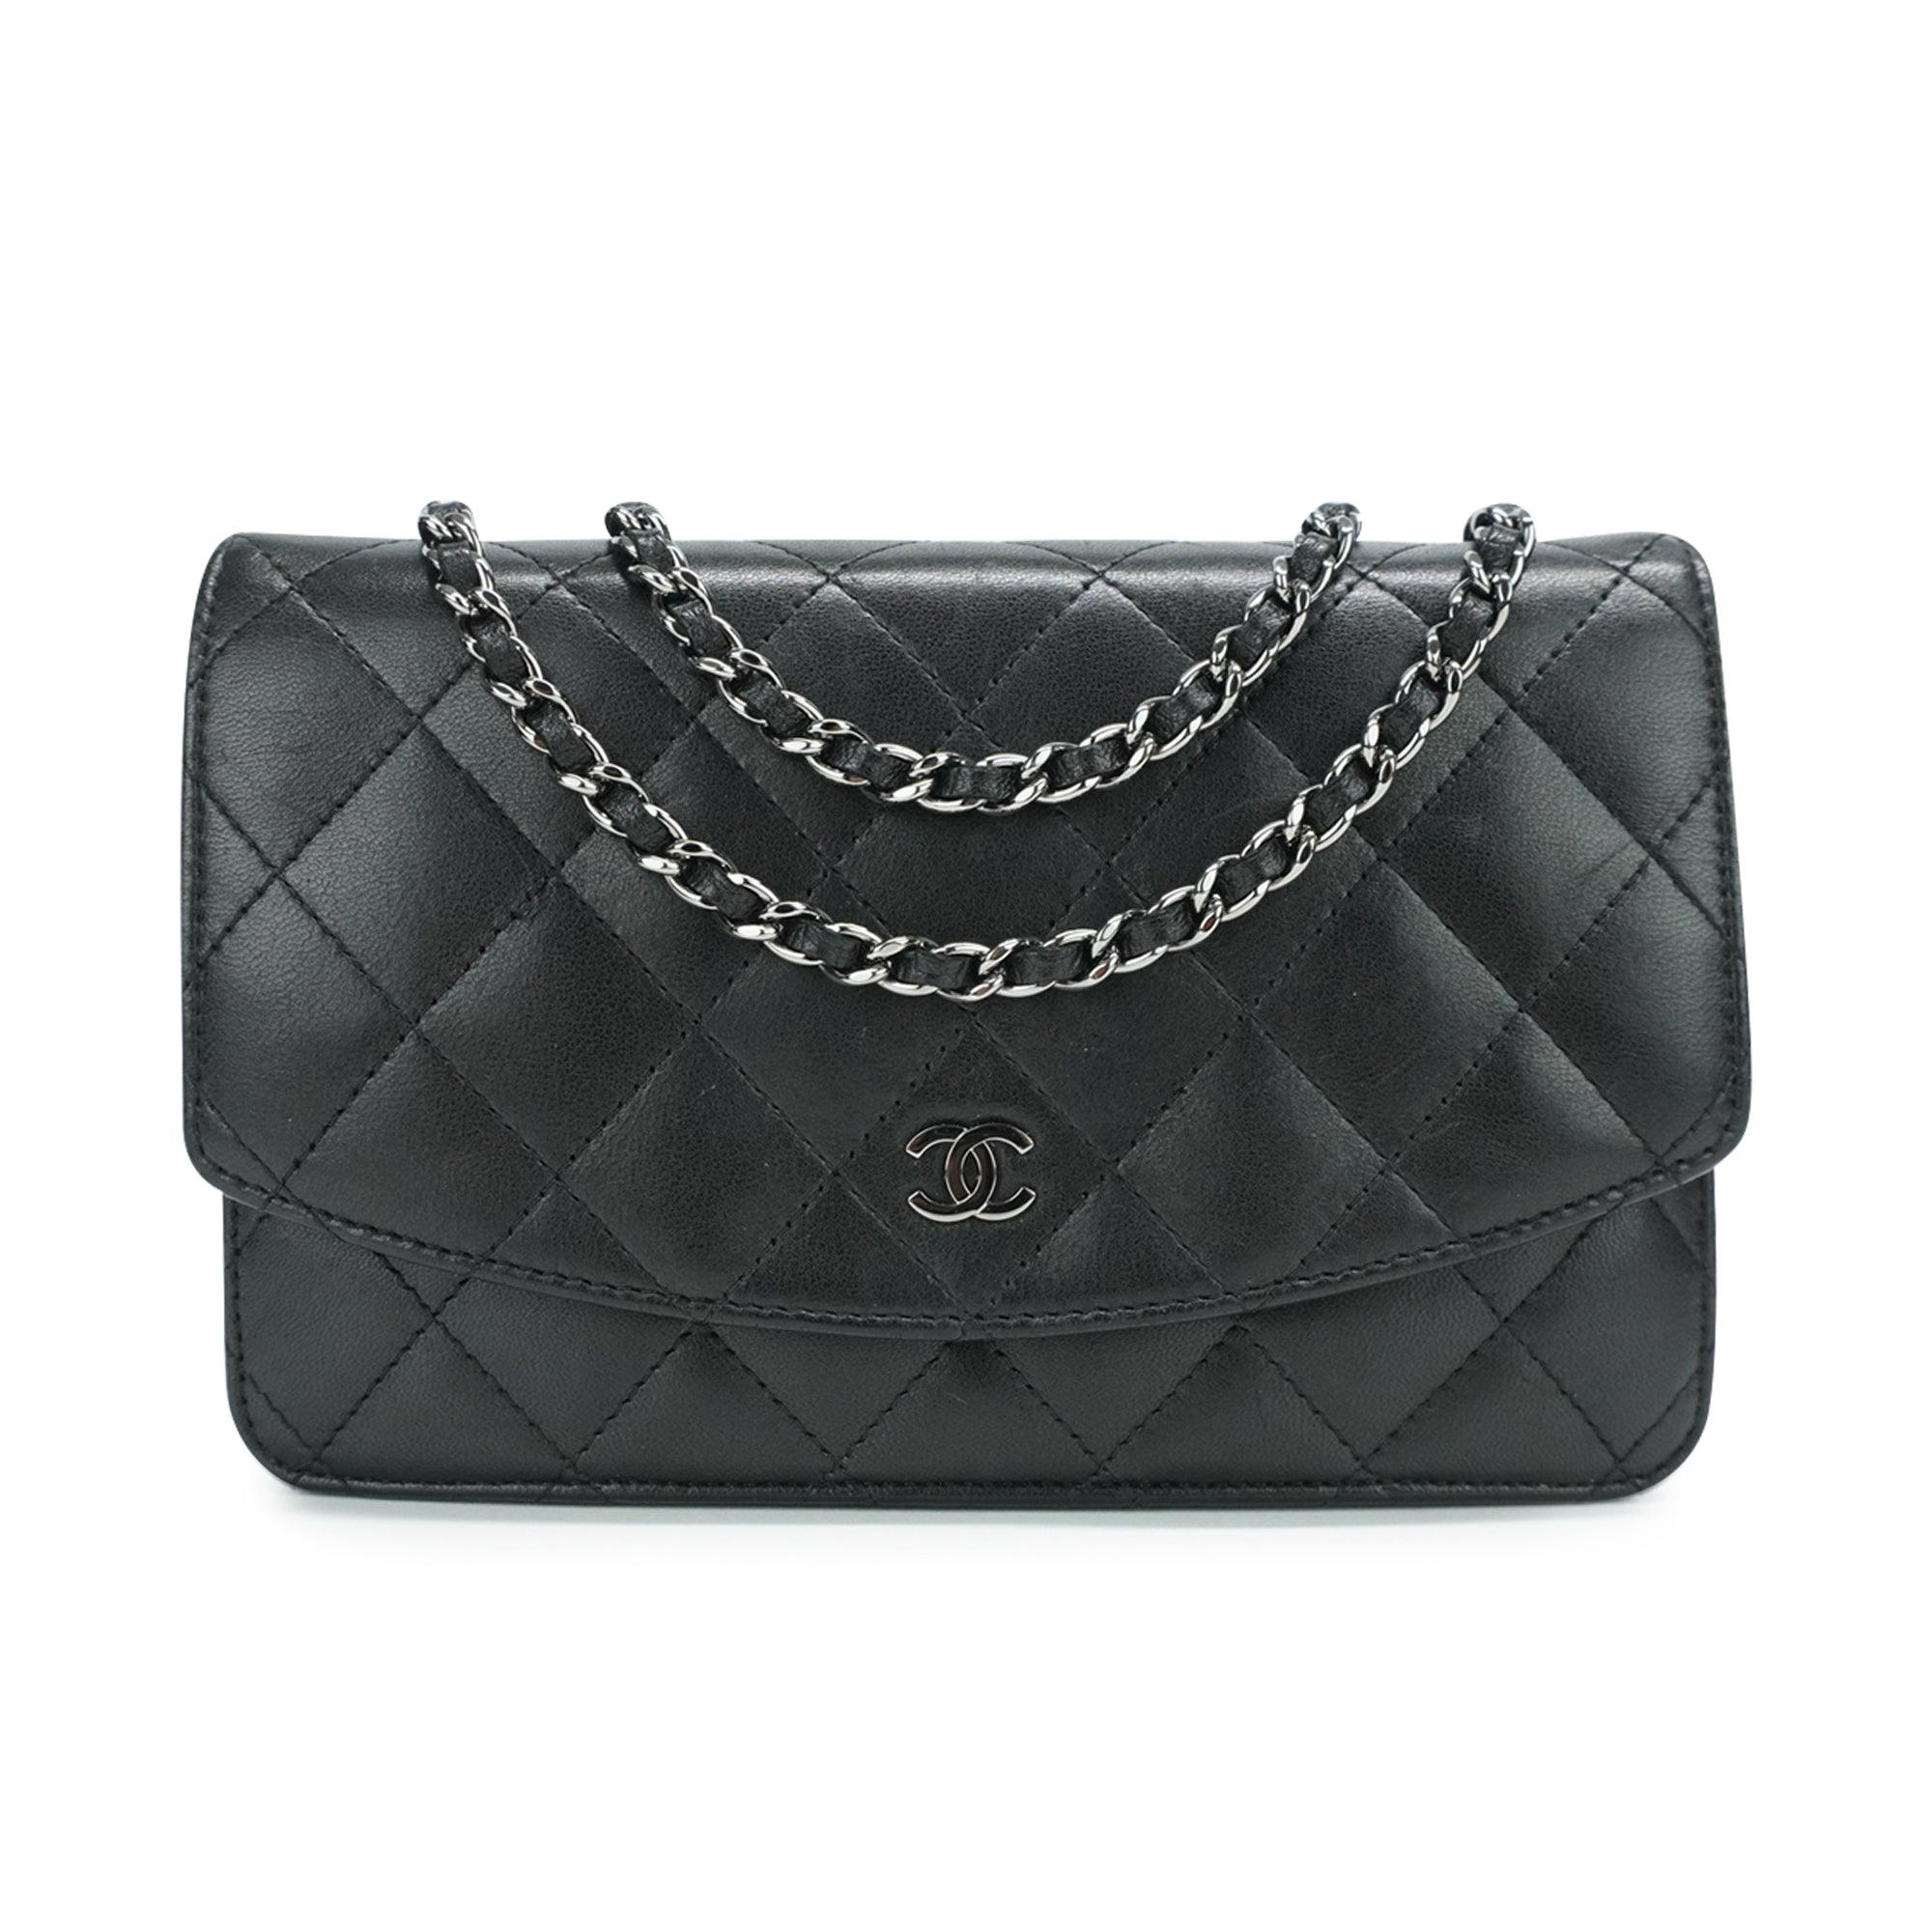 Chanel 'Wallet on Chain' Bag - Fashionably Yours